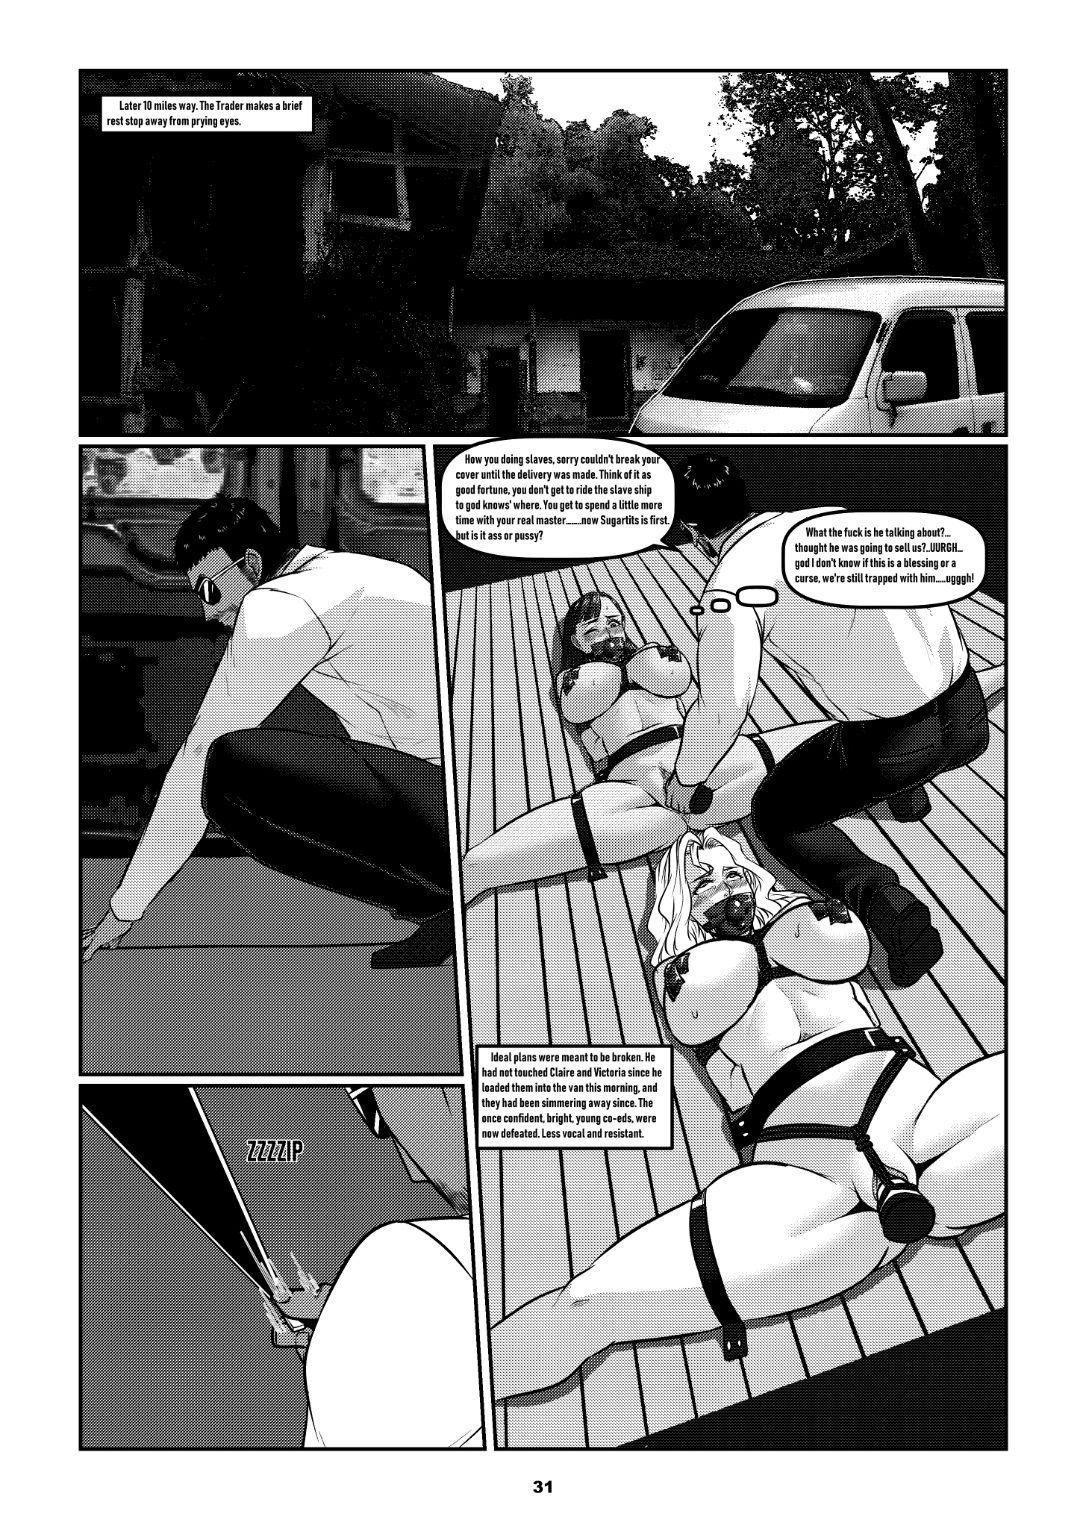 Smoking Voyages of the Trader 2 Youth Porn - Page 32